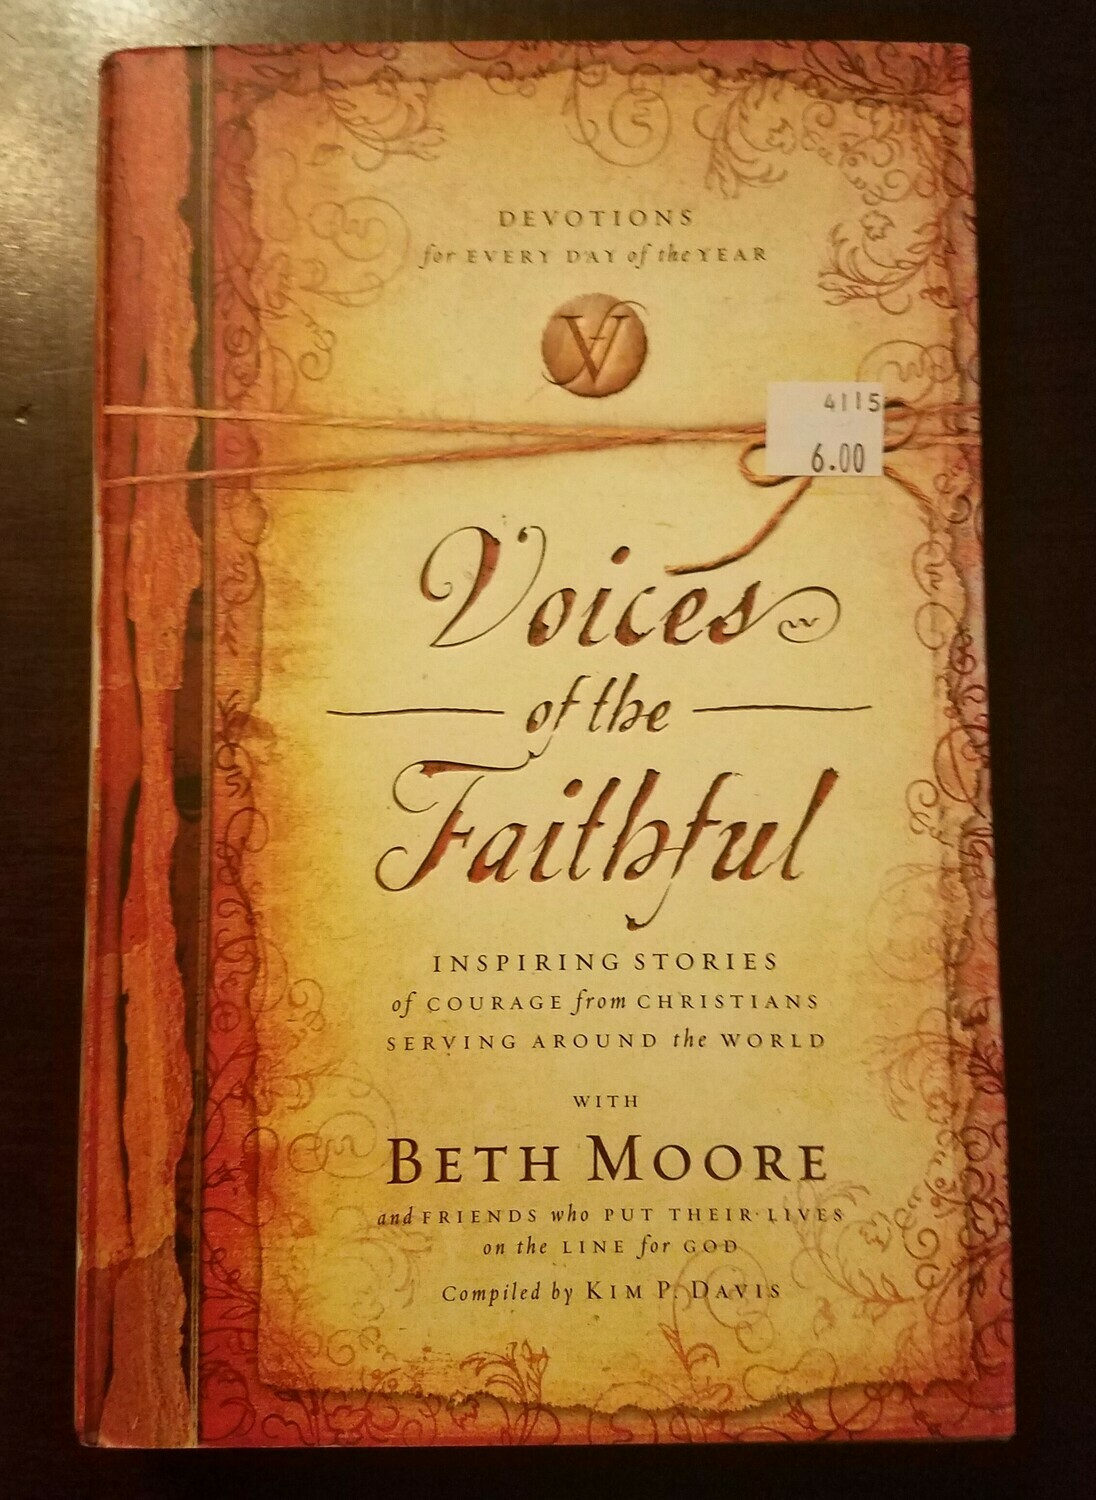 Voices of the Faithful by Beth Moore and Friends